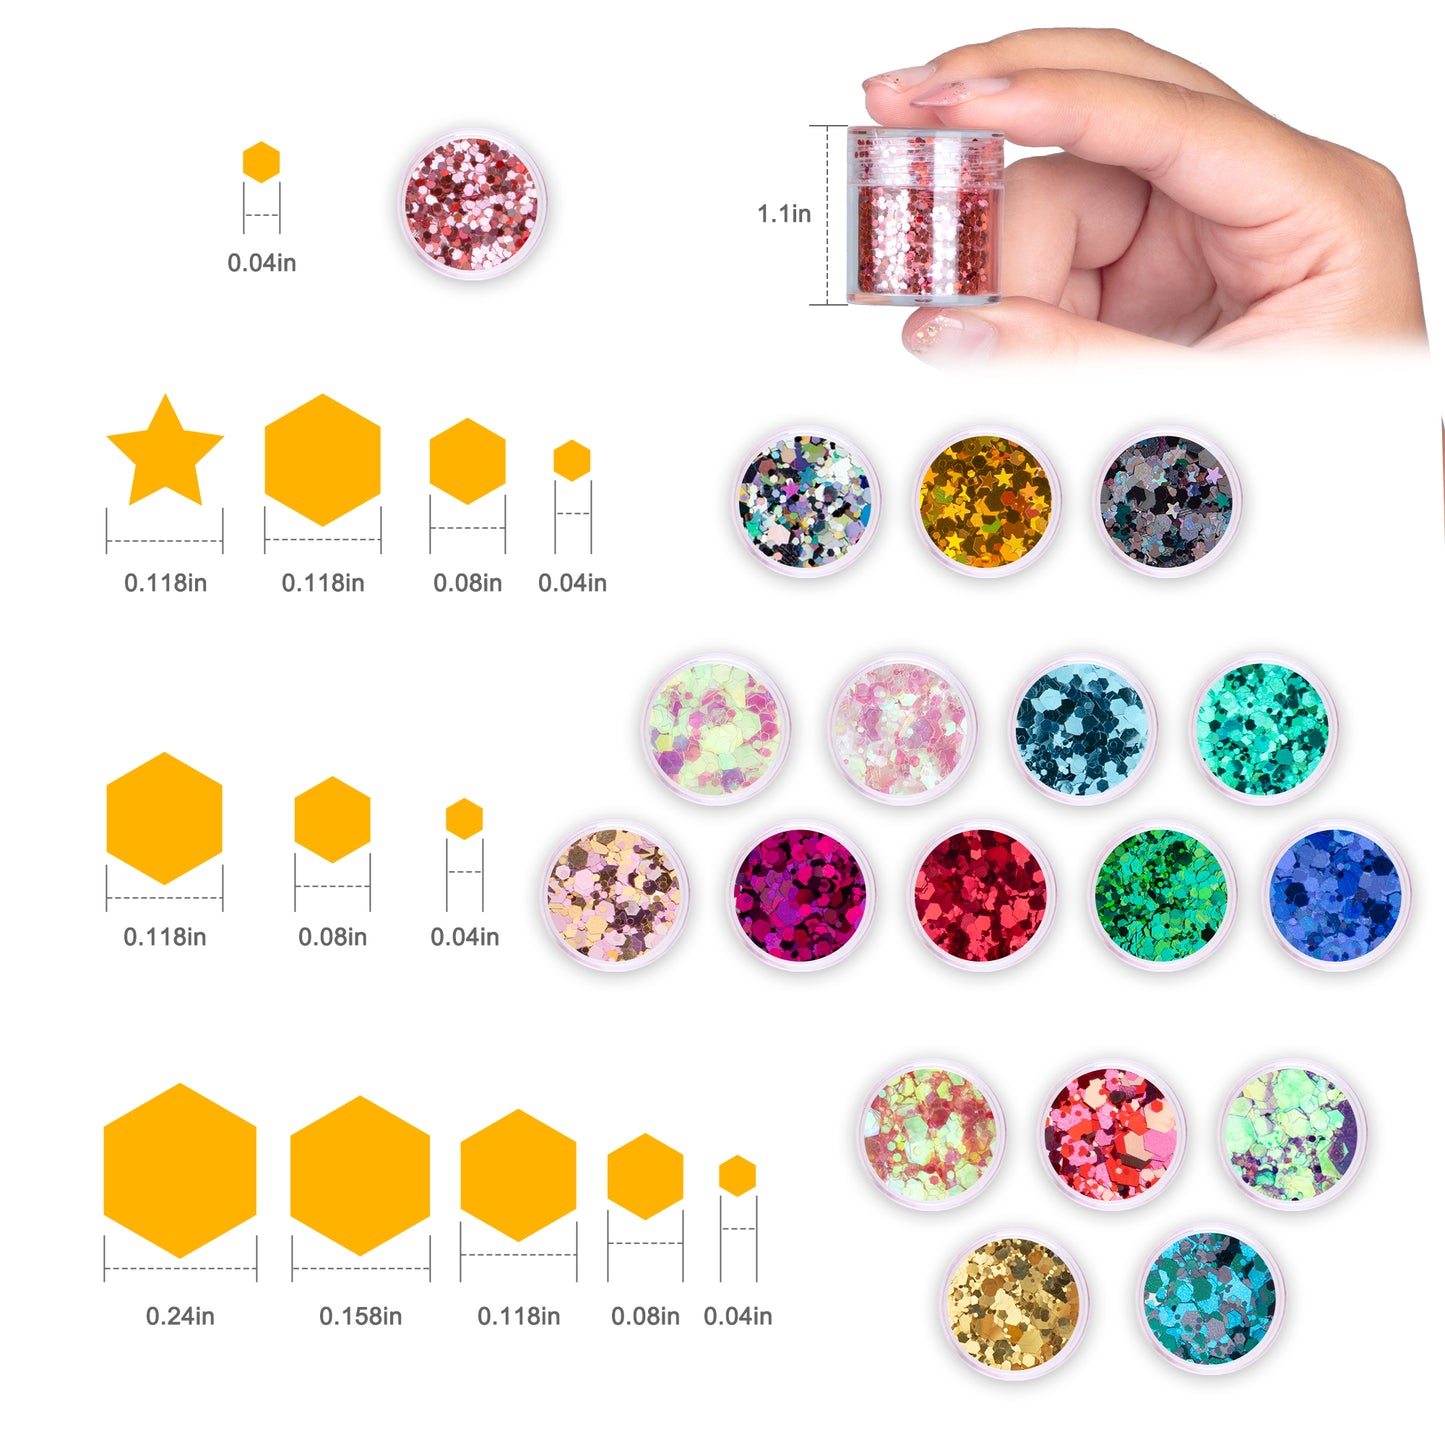 Aphlos Nail Art 18 Assorted Colors Holographic Glitters Different Size of Star A